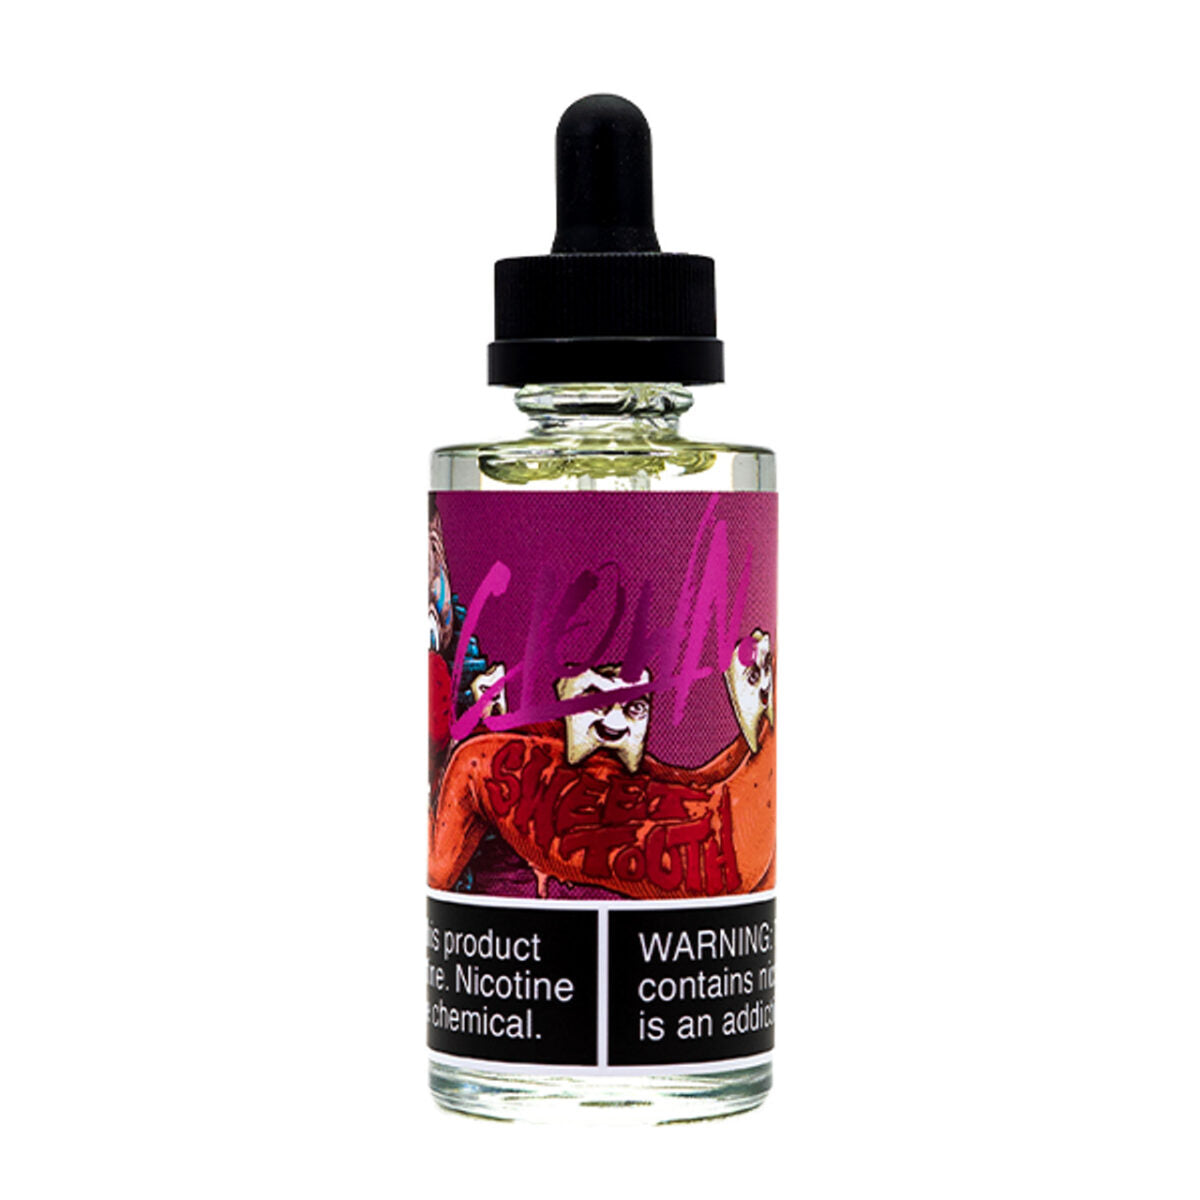 Sweet Tooth by Bad Drip Series 60mL Bottle